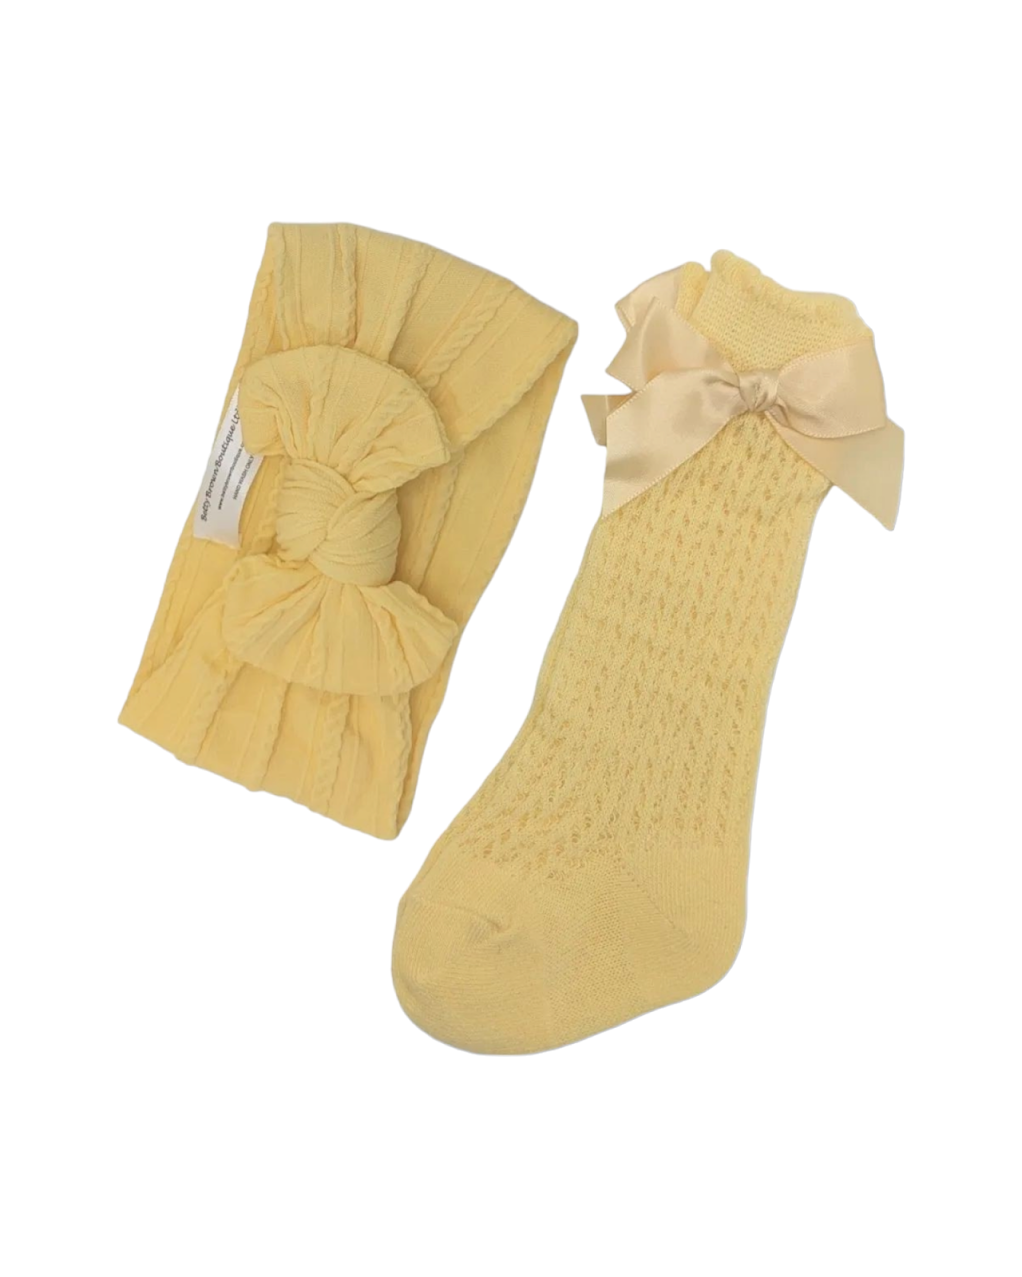 Our Daffodil Yellow Smaller Headwrap & Open Patterned Knee High Socks Set - Betty Brown Boutique Ltd